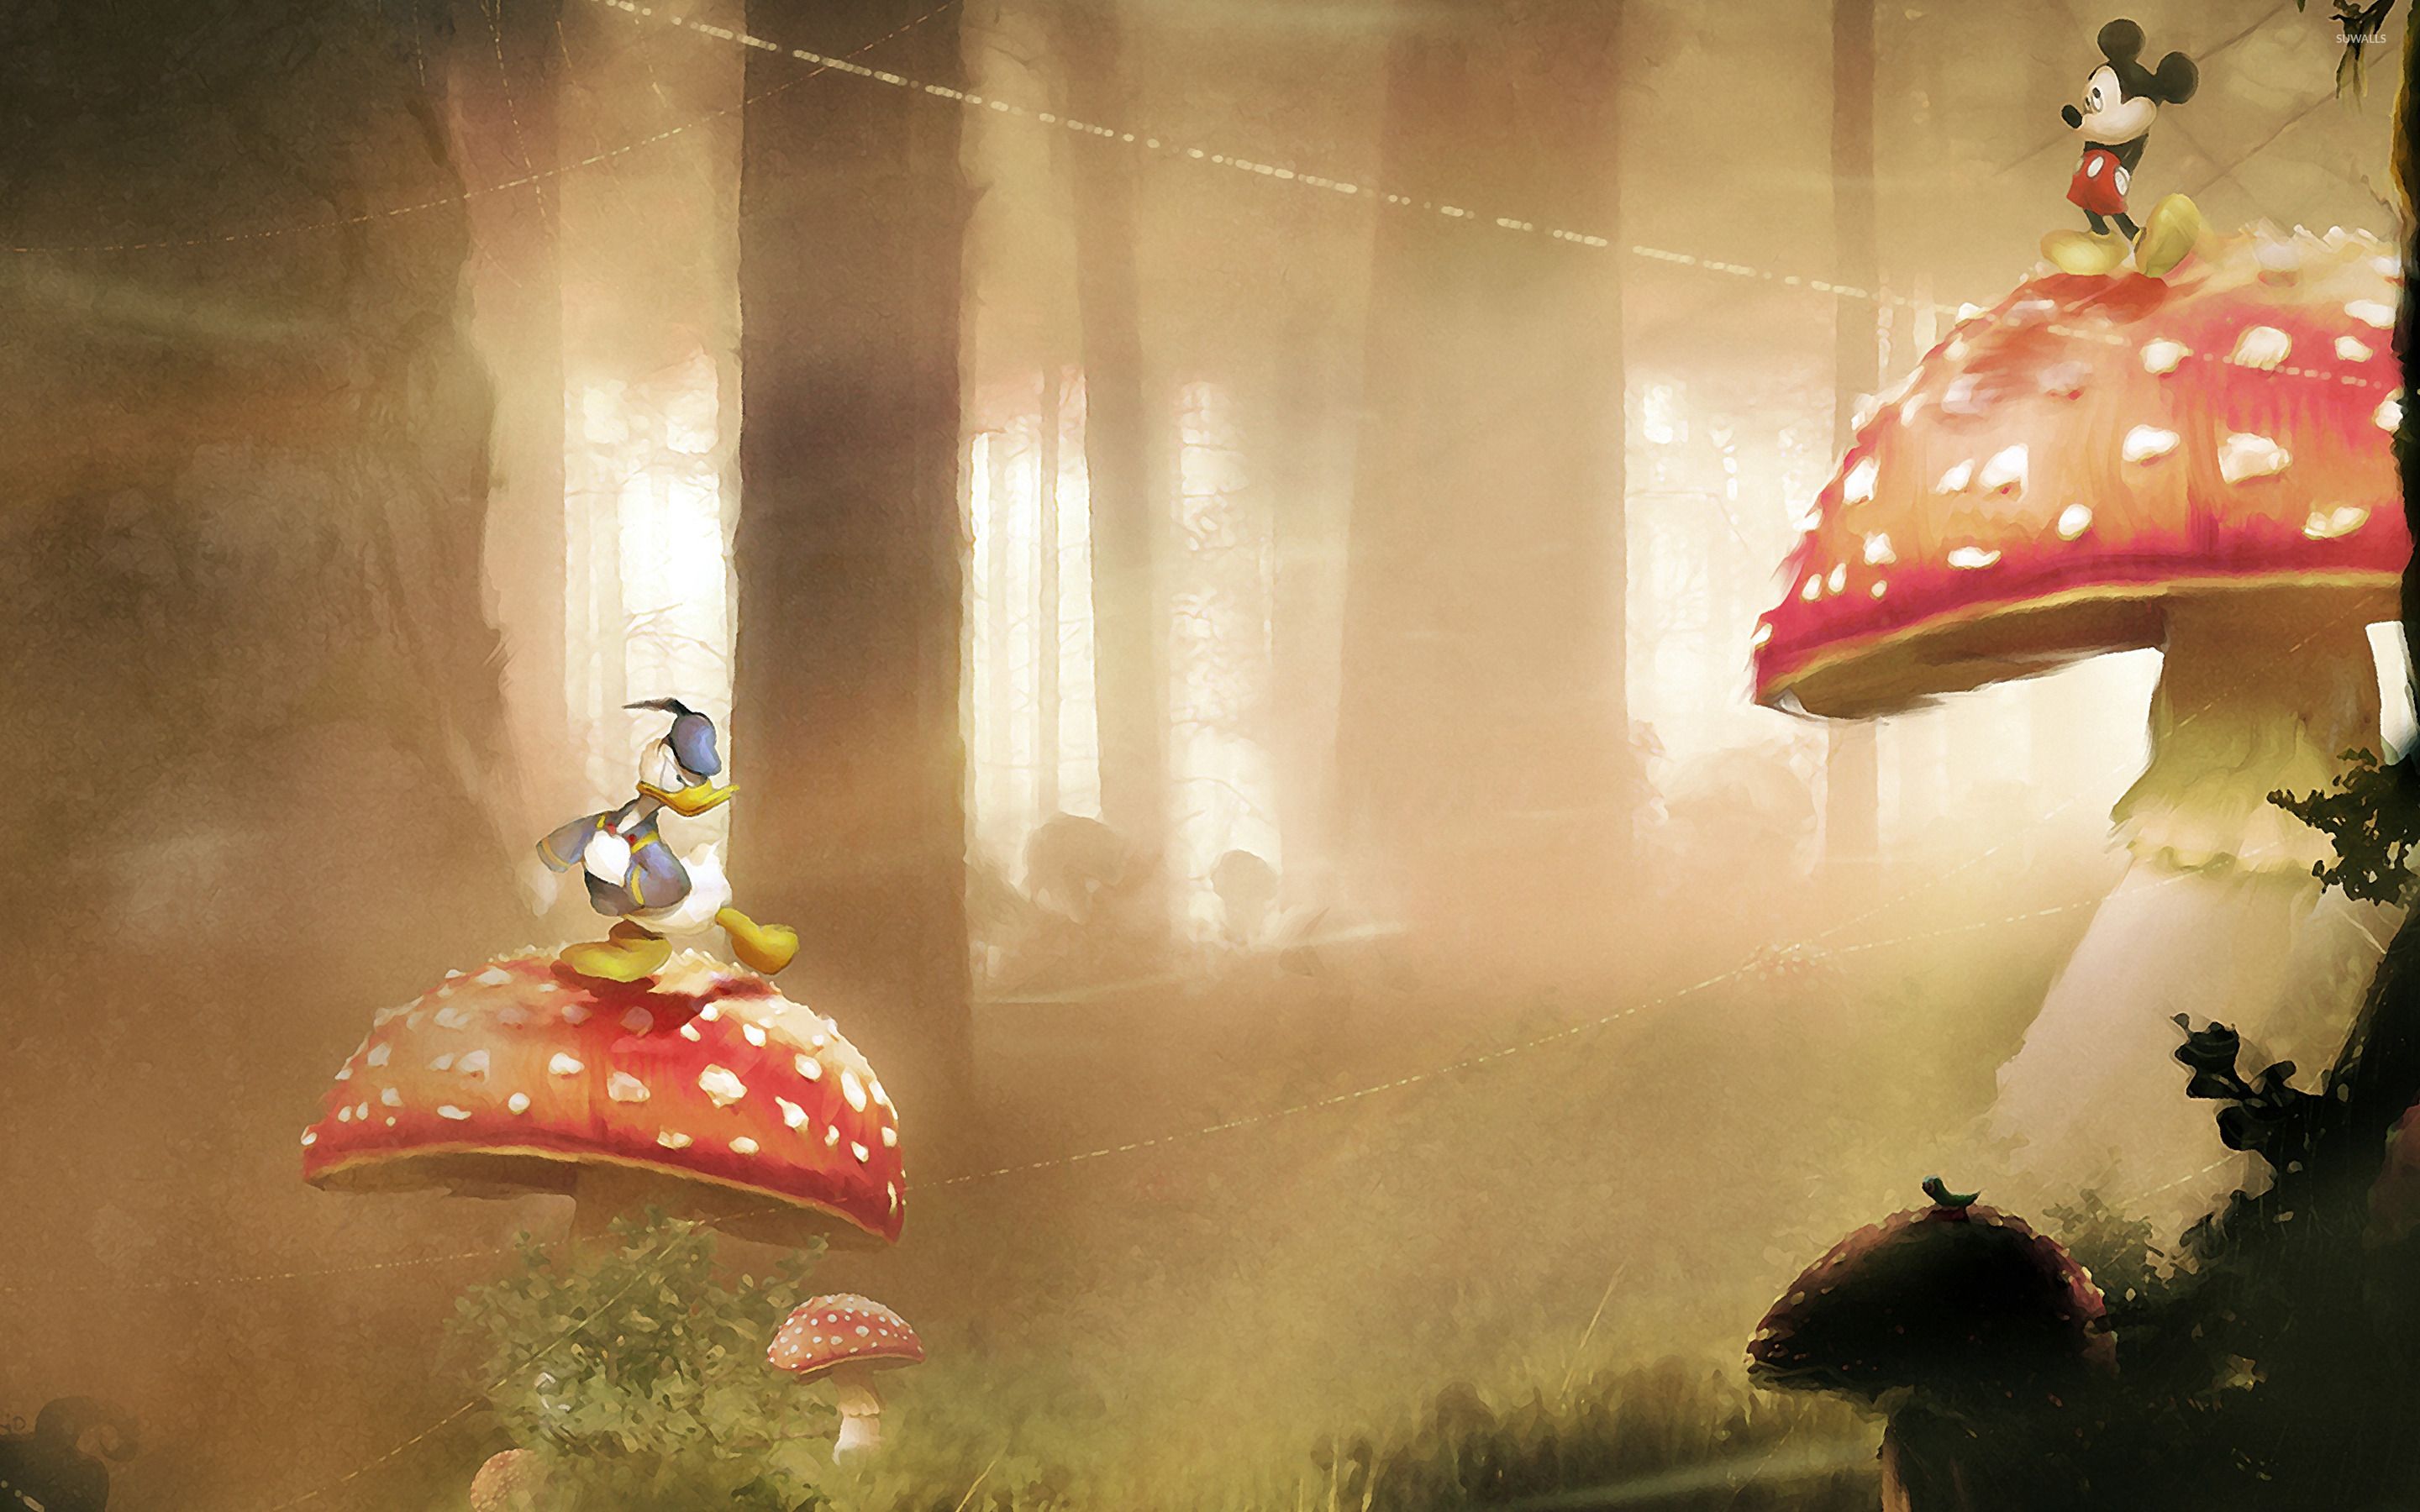 Mickey and Donald on giant mushrooms wallpaper wallpaper